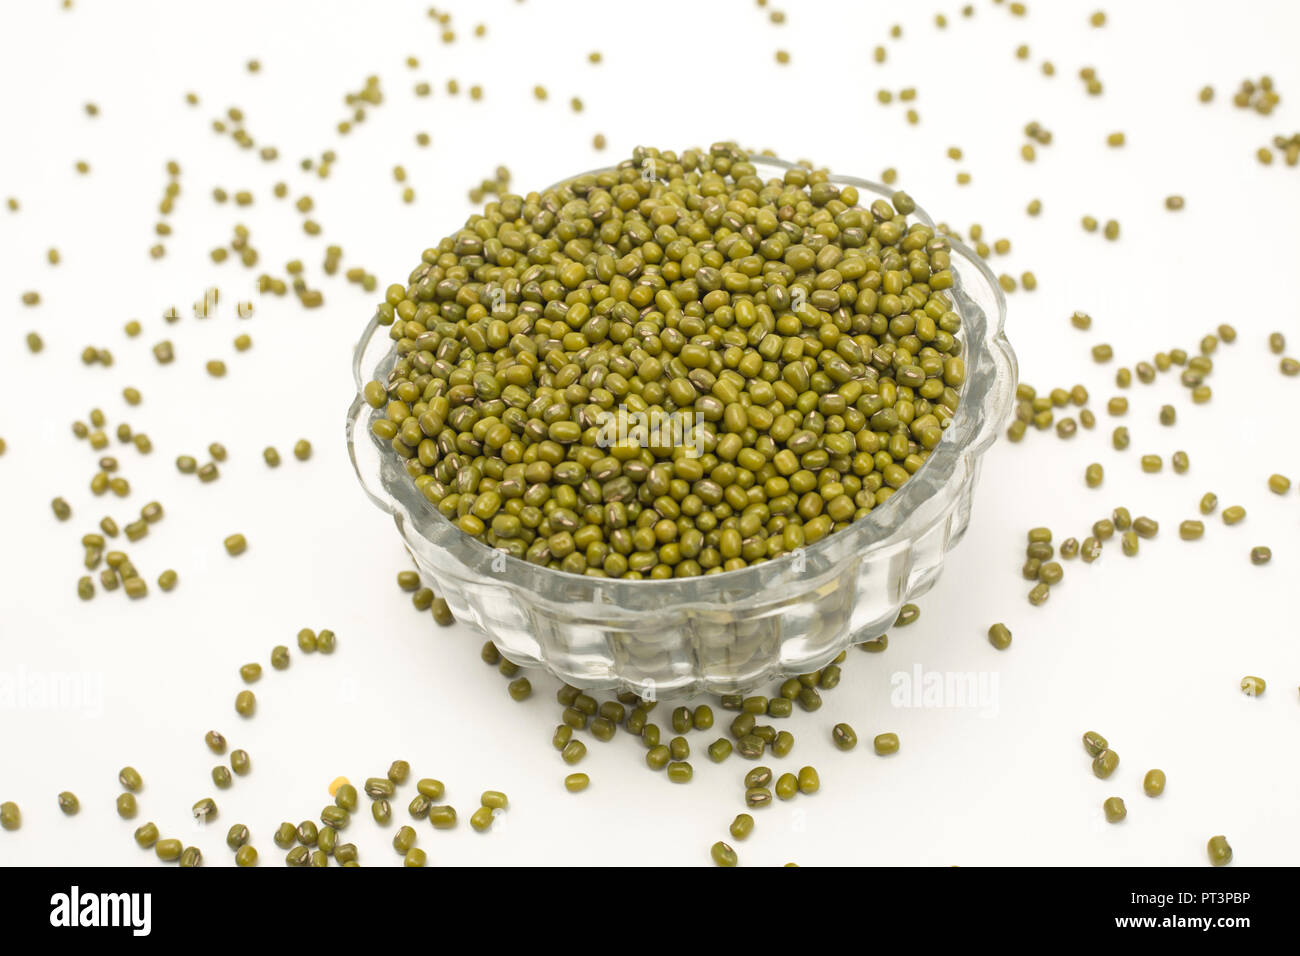 Green mung dal lentil pulse bean isolated on white background. Stock Photo